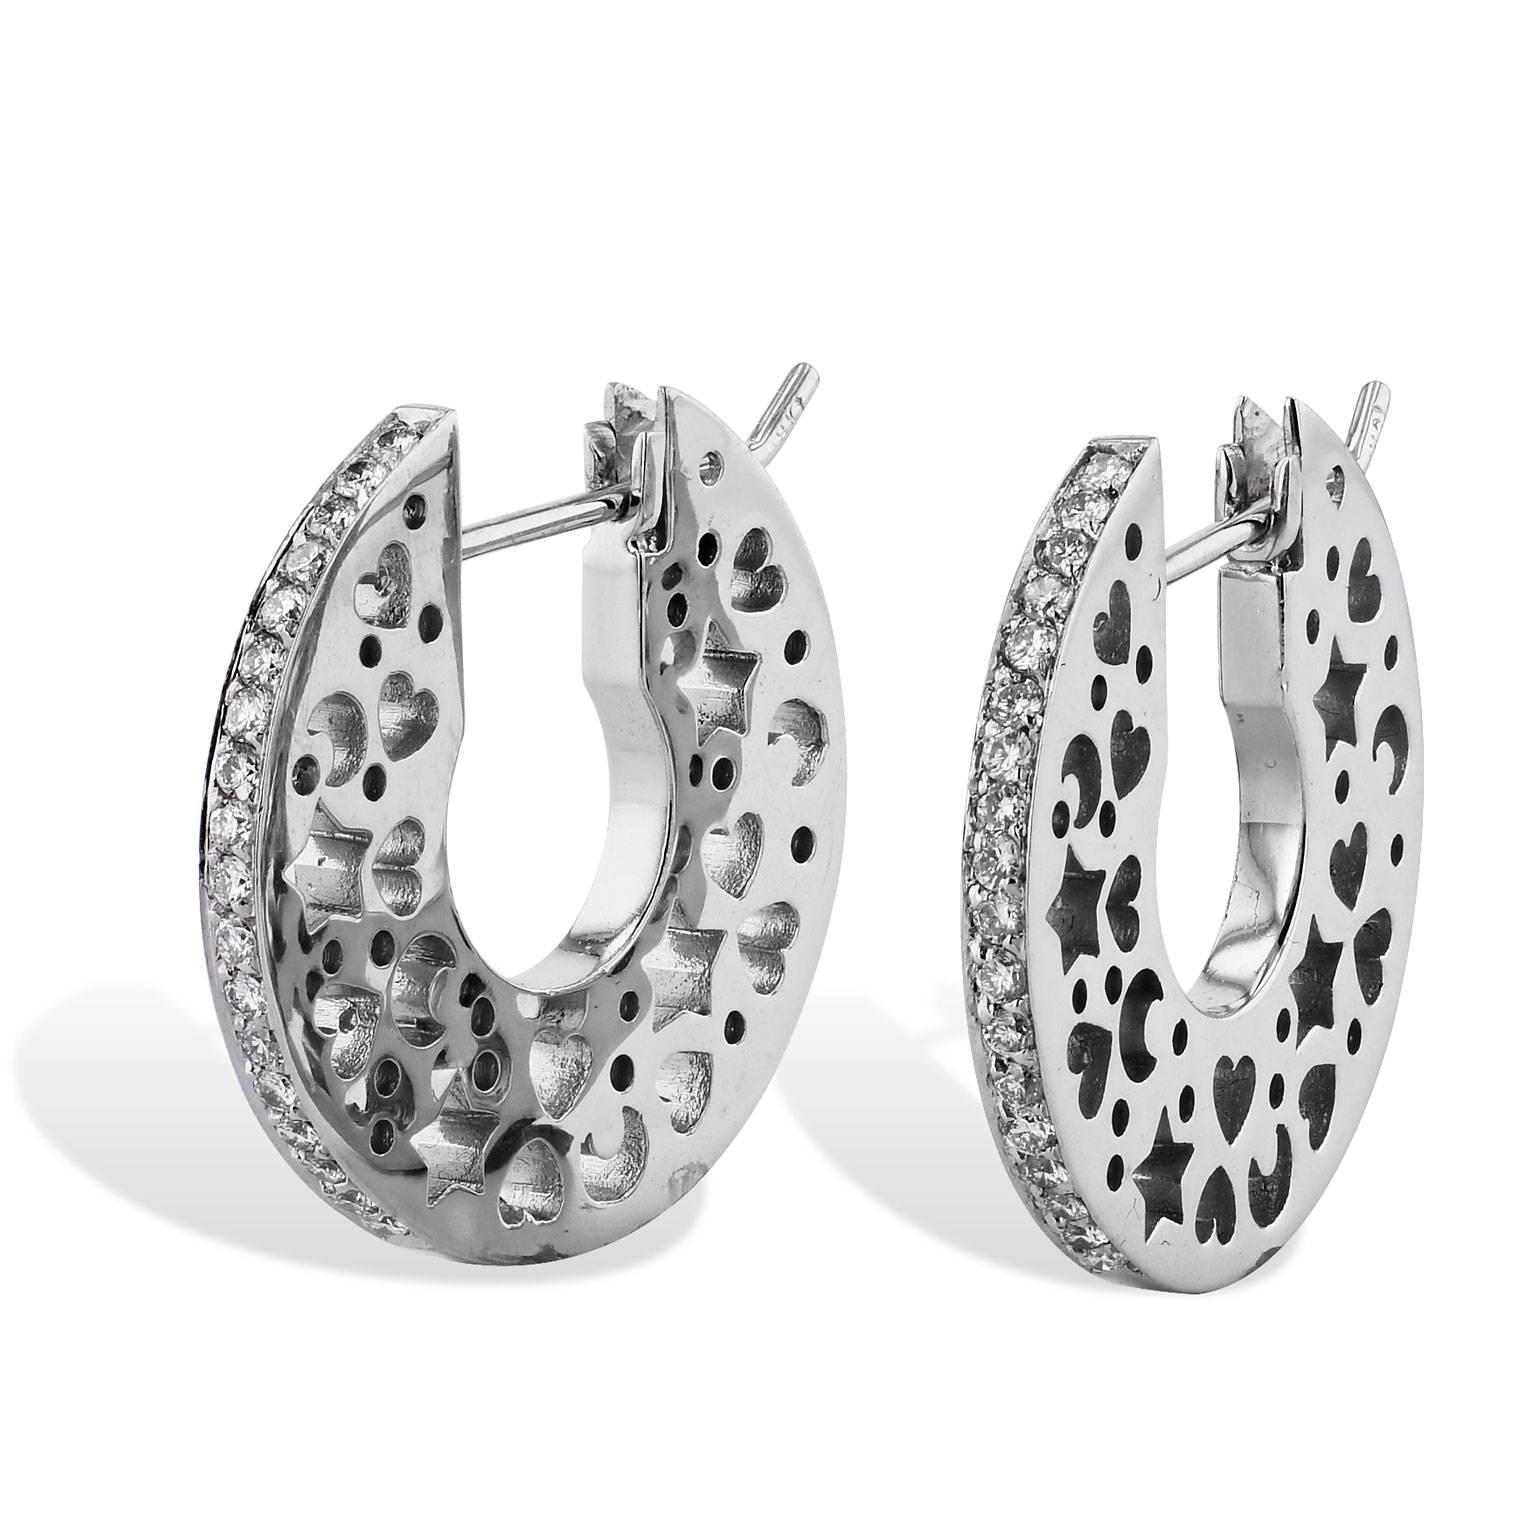 These previously loved Italian hoops are fashioned in 18 karat white gold and feature 0.36 carat of pave-set diamond (F/G/SI1). Embellished by punch-out designs of hearts, stars, and moons; these hoop earrings are charming and fun.